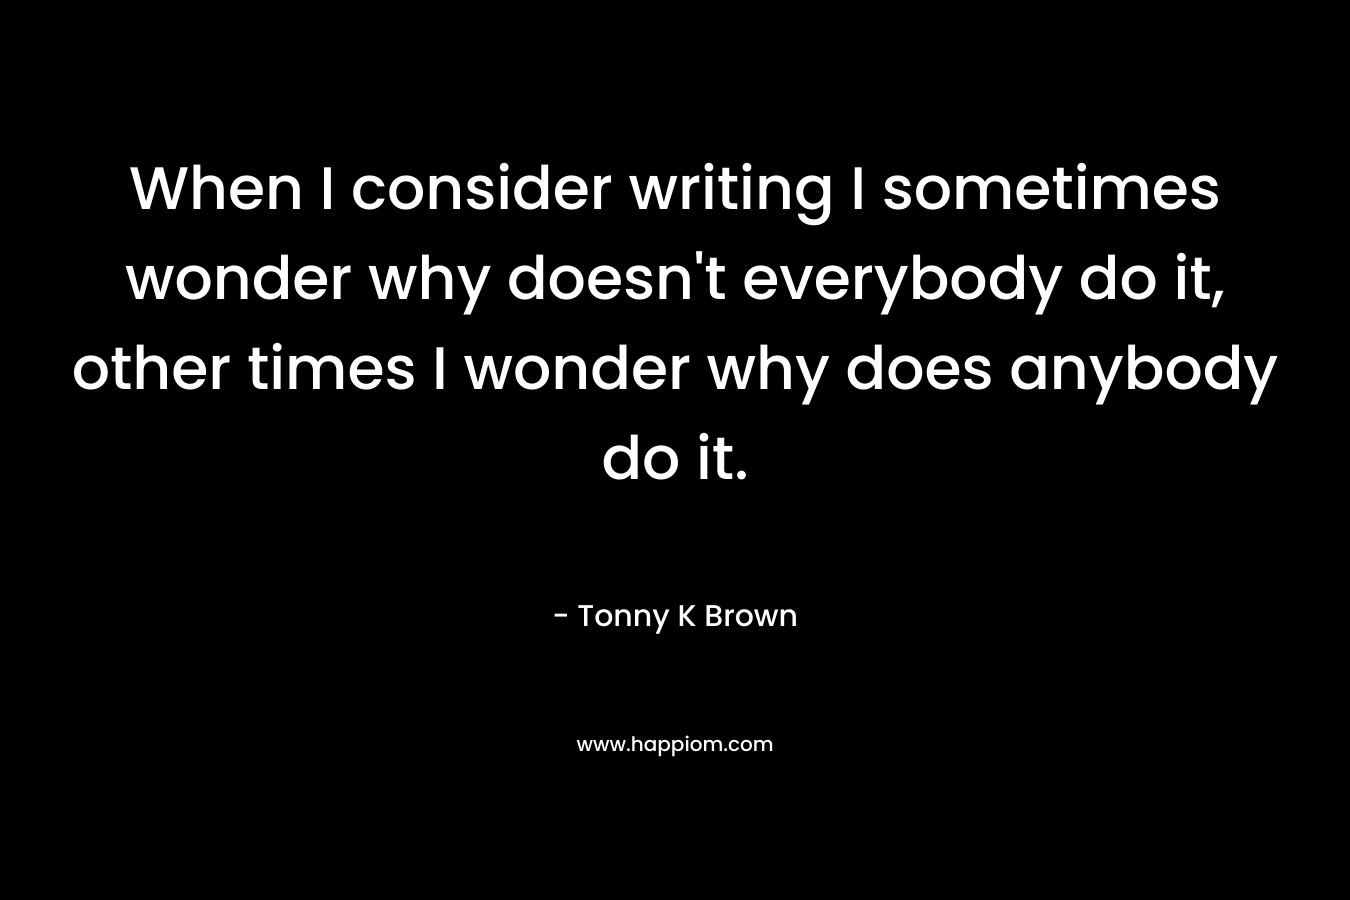 When I consider writing I sometimes wonder why doesn't everybody do it, other times I wonder why does anybody do it.